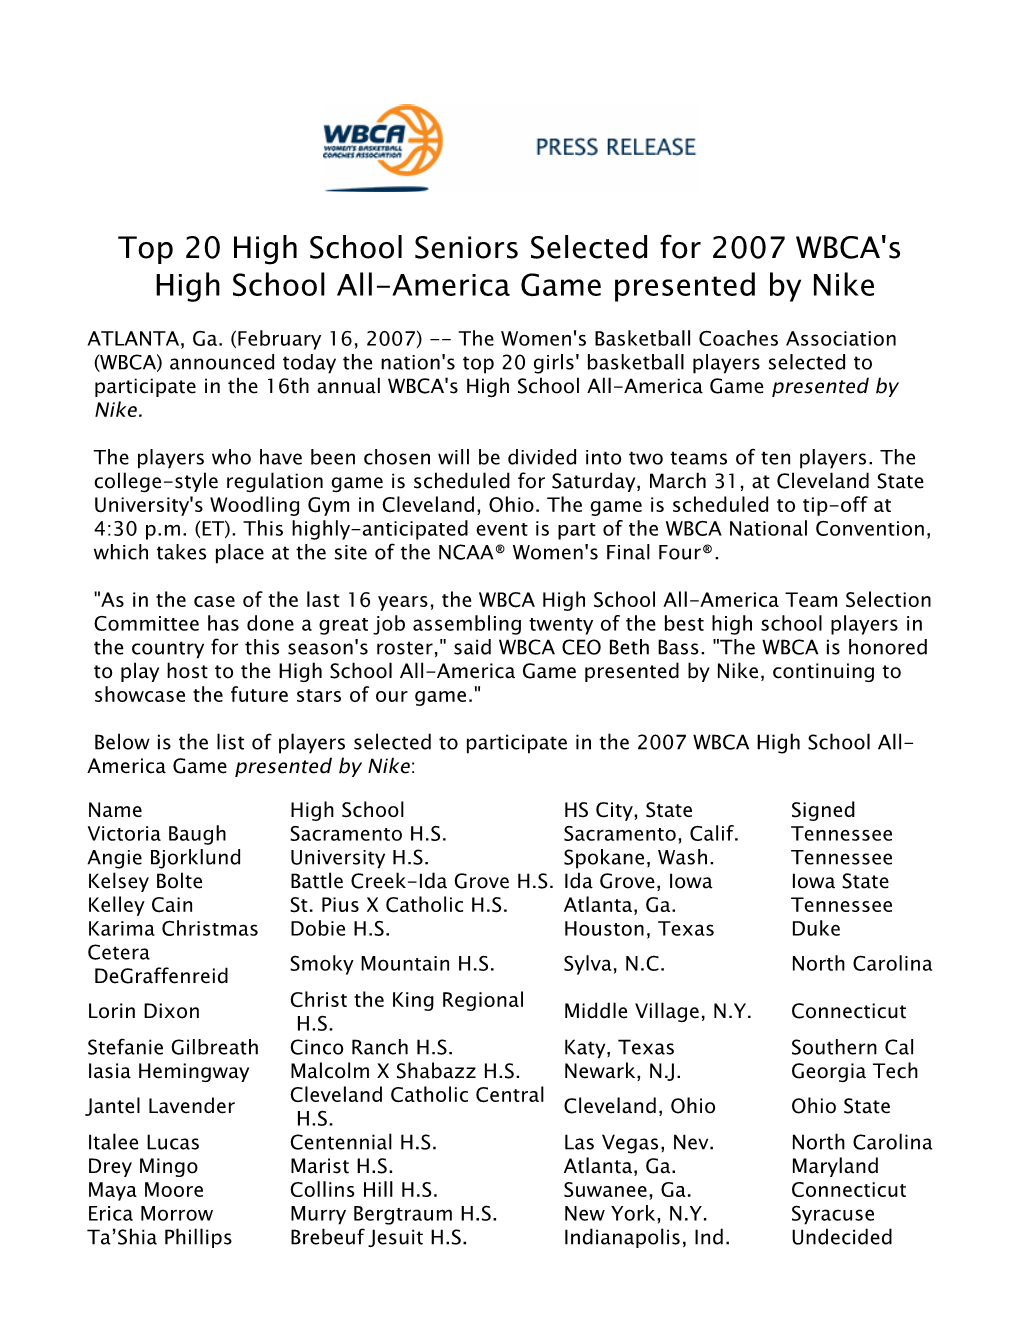 Top 20 High School Seniors Selected for 2007 WBCA's High School All-America Game Presented by Nike